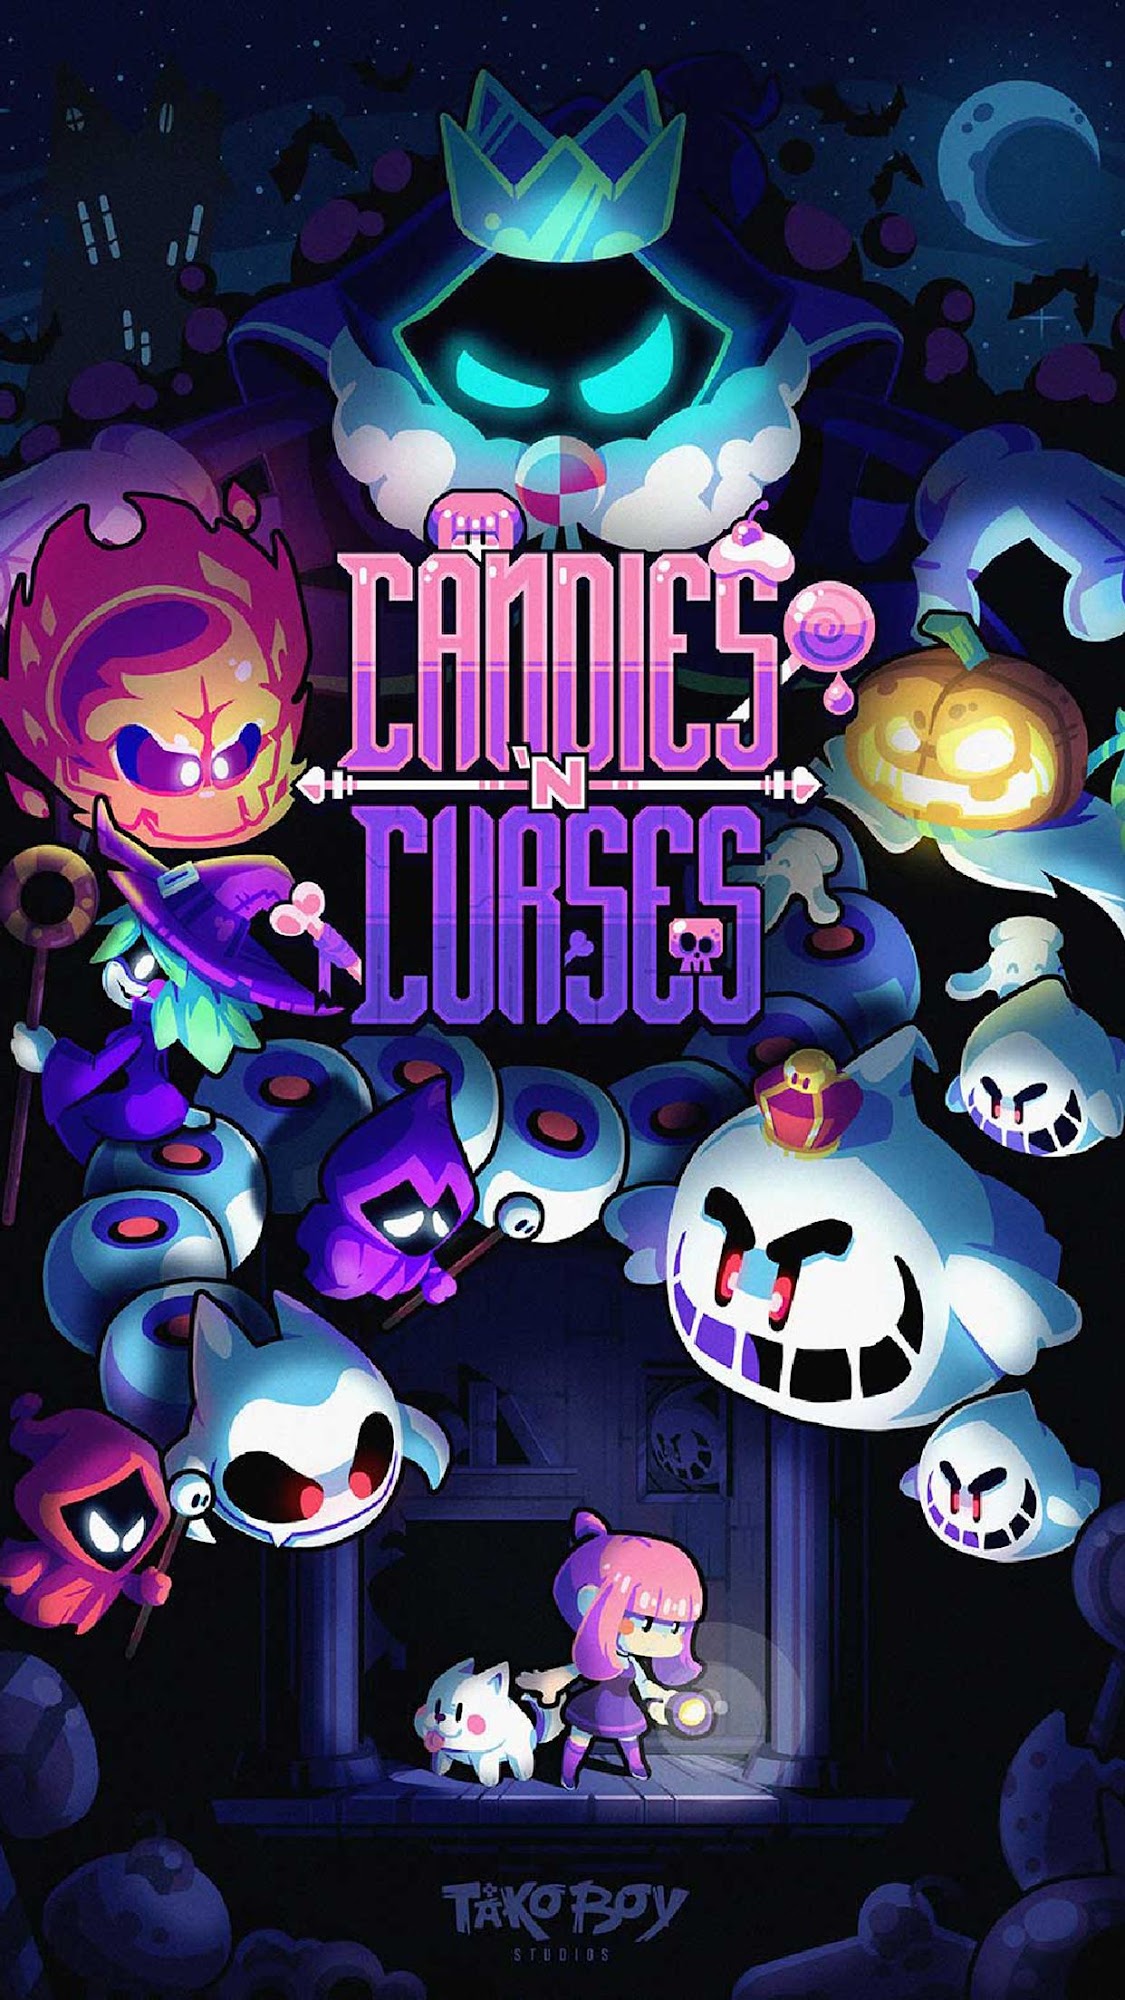 Candies 'n Curses for Android